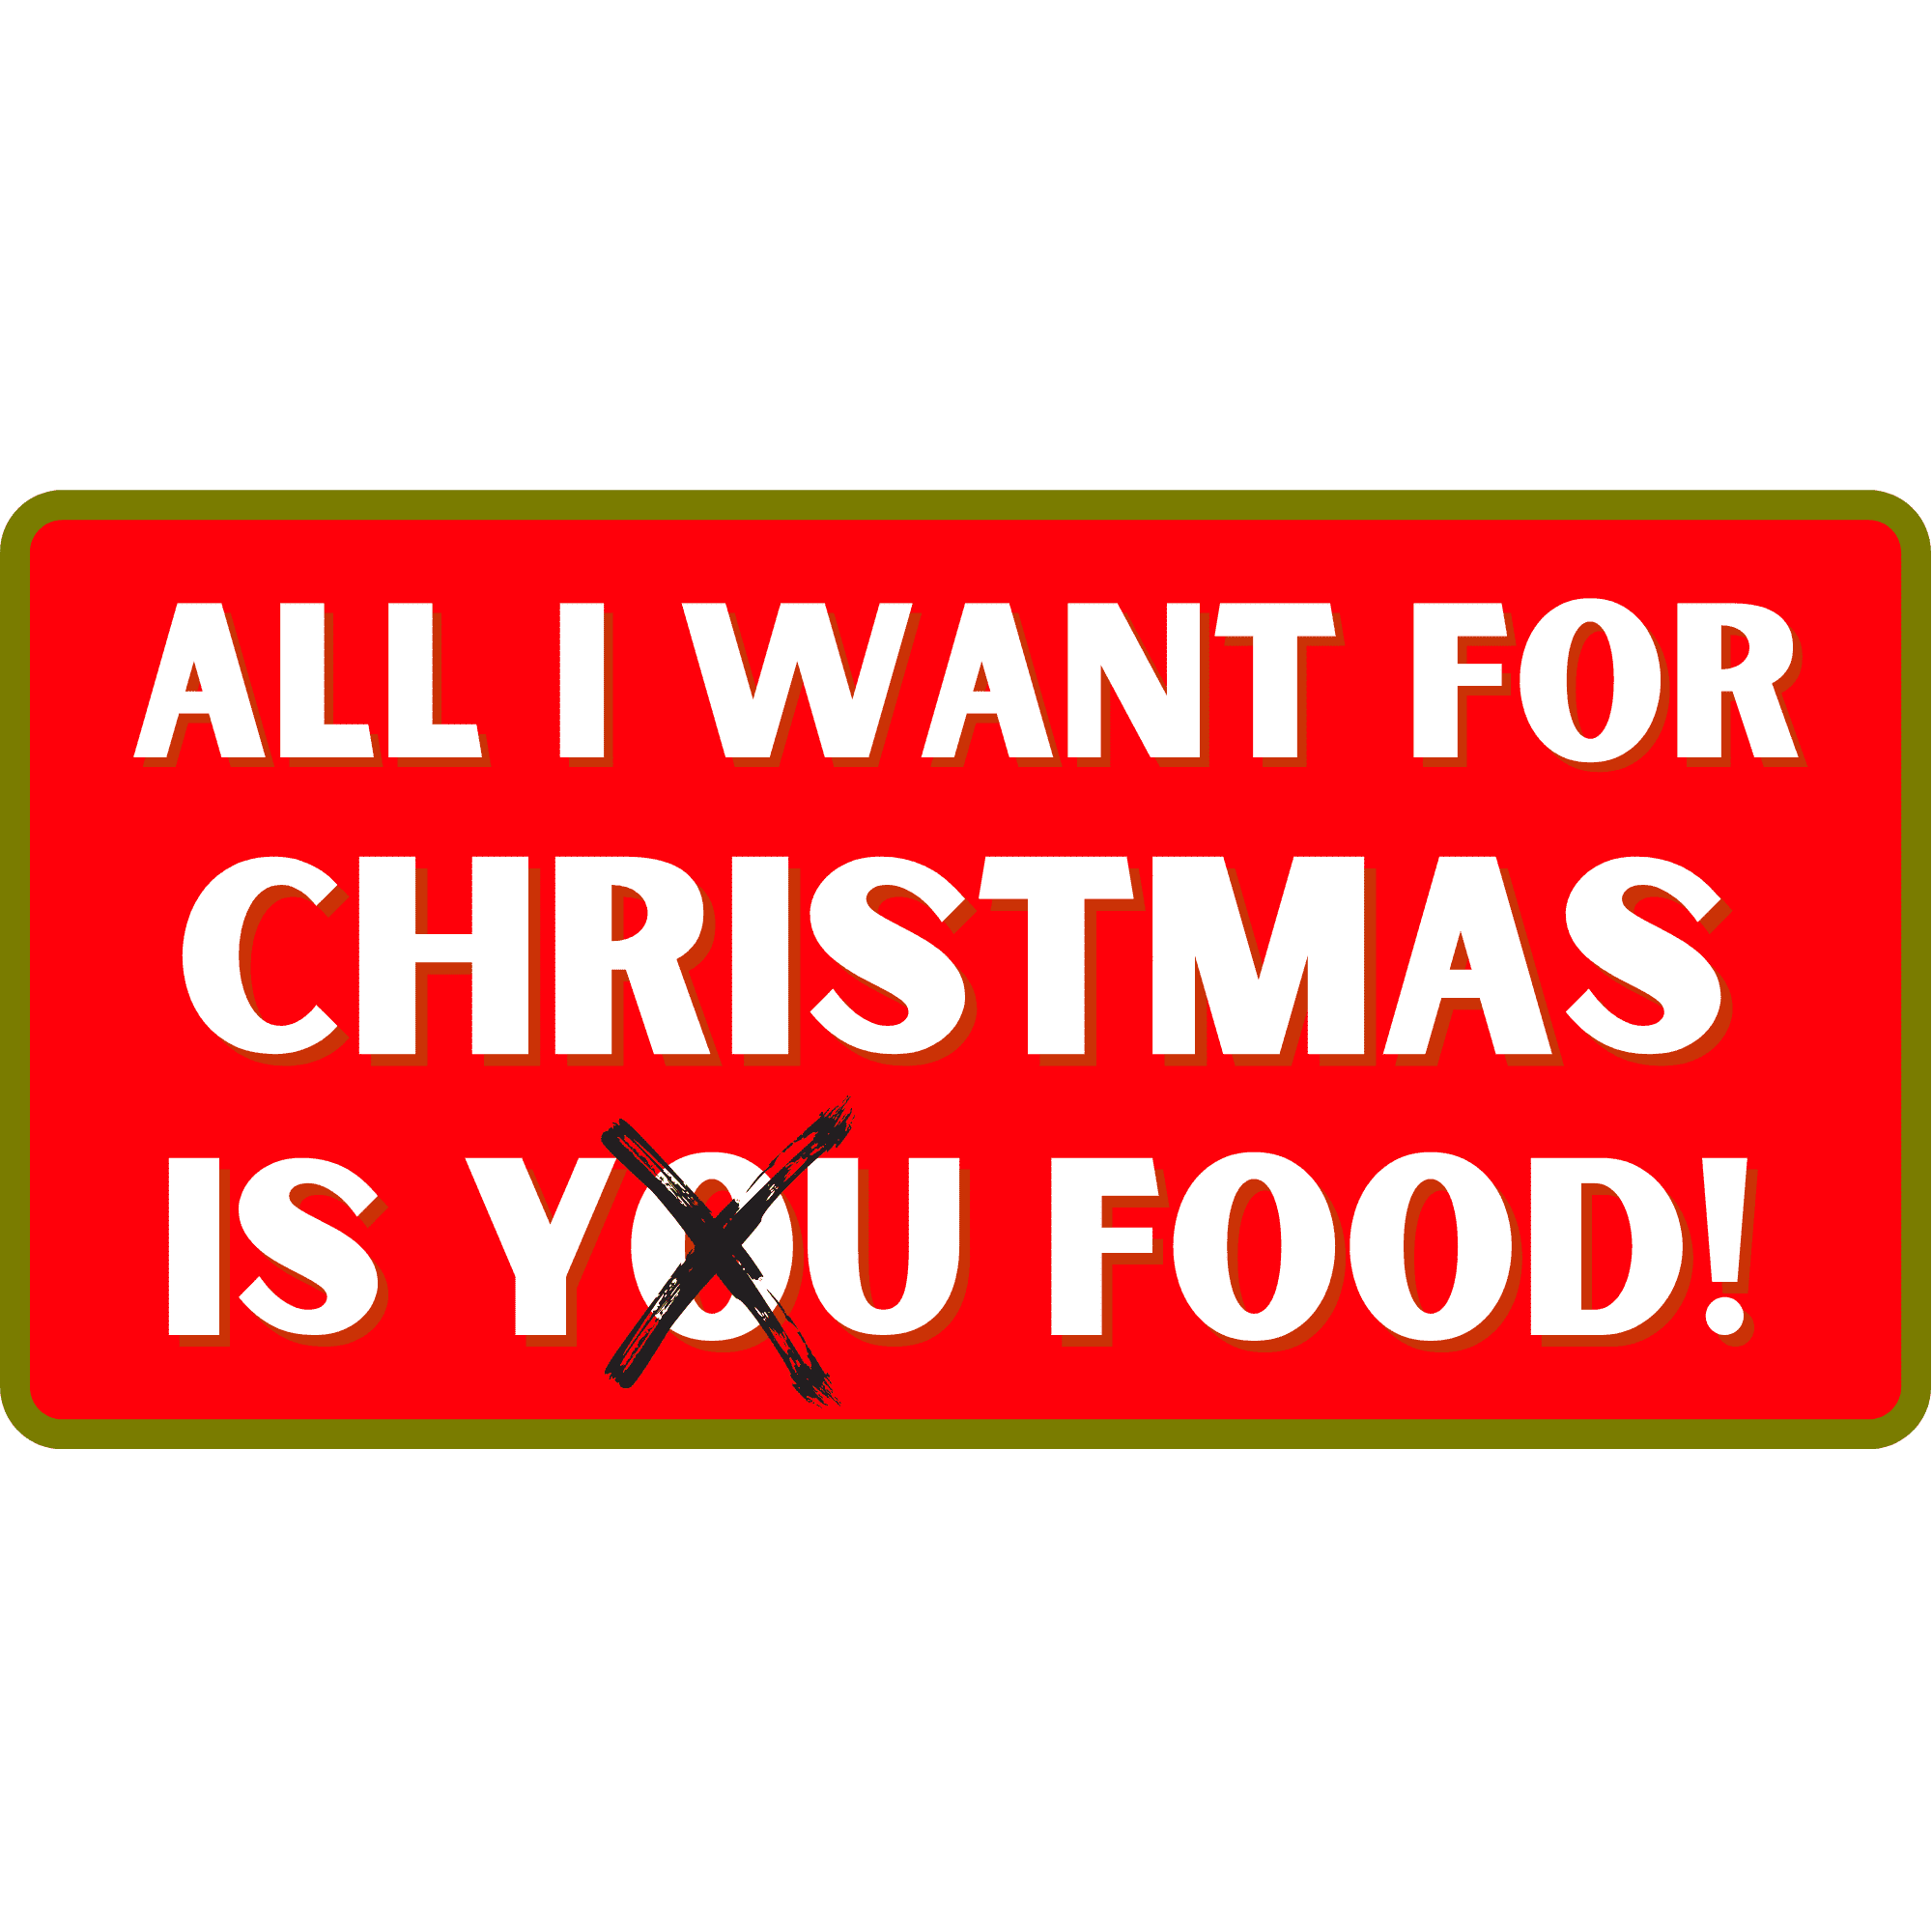 All-I-Want-For-Christmas-is-Food